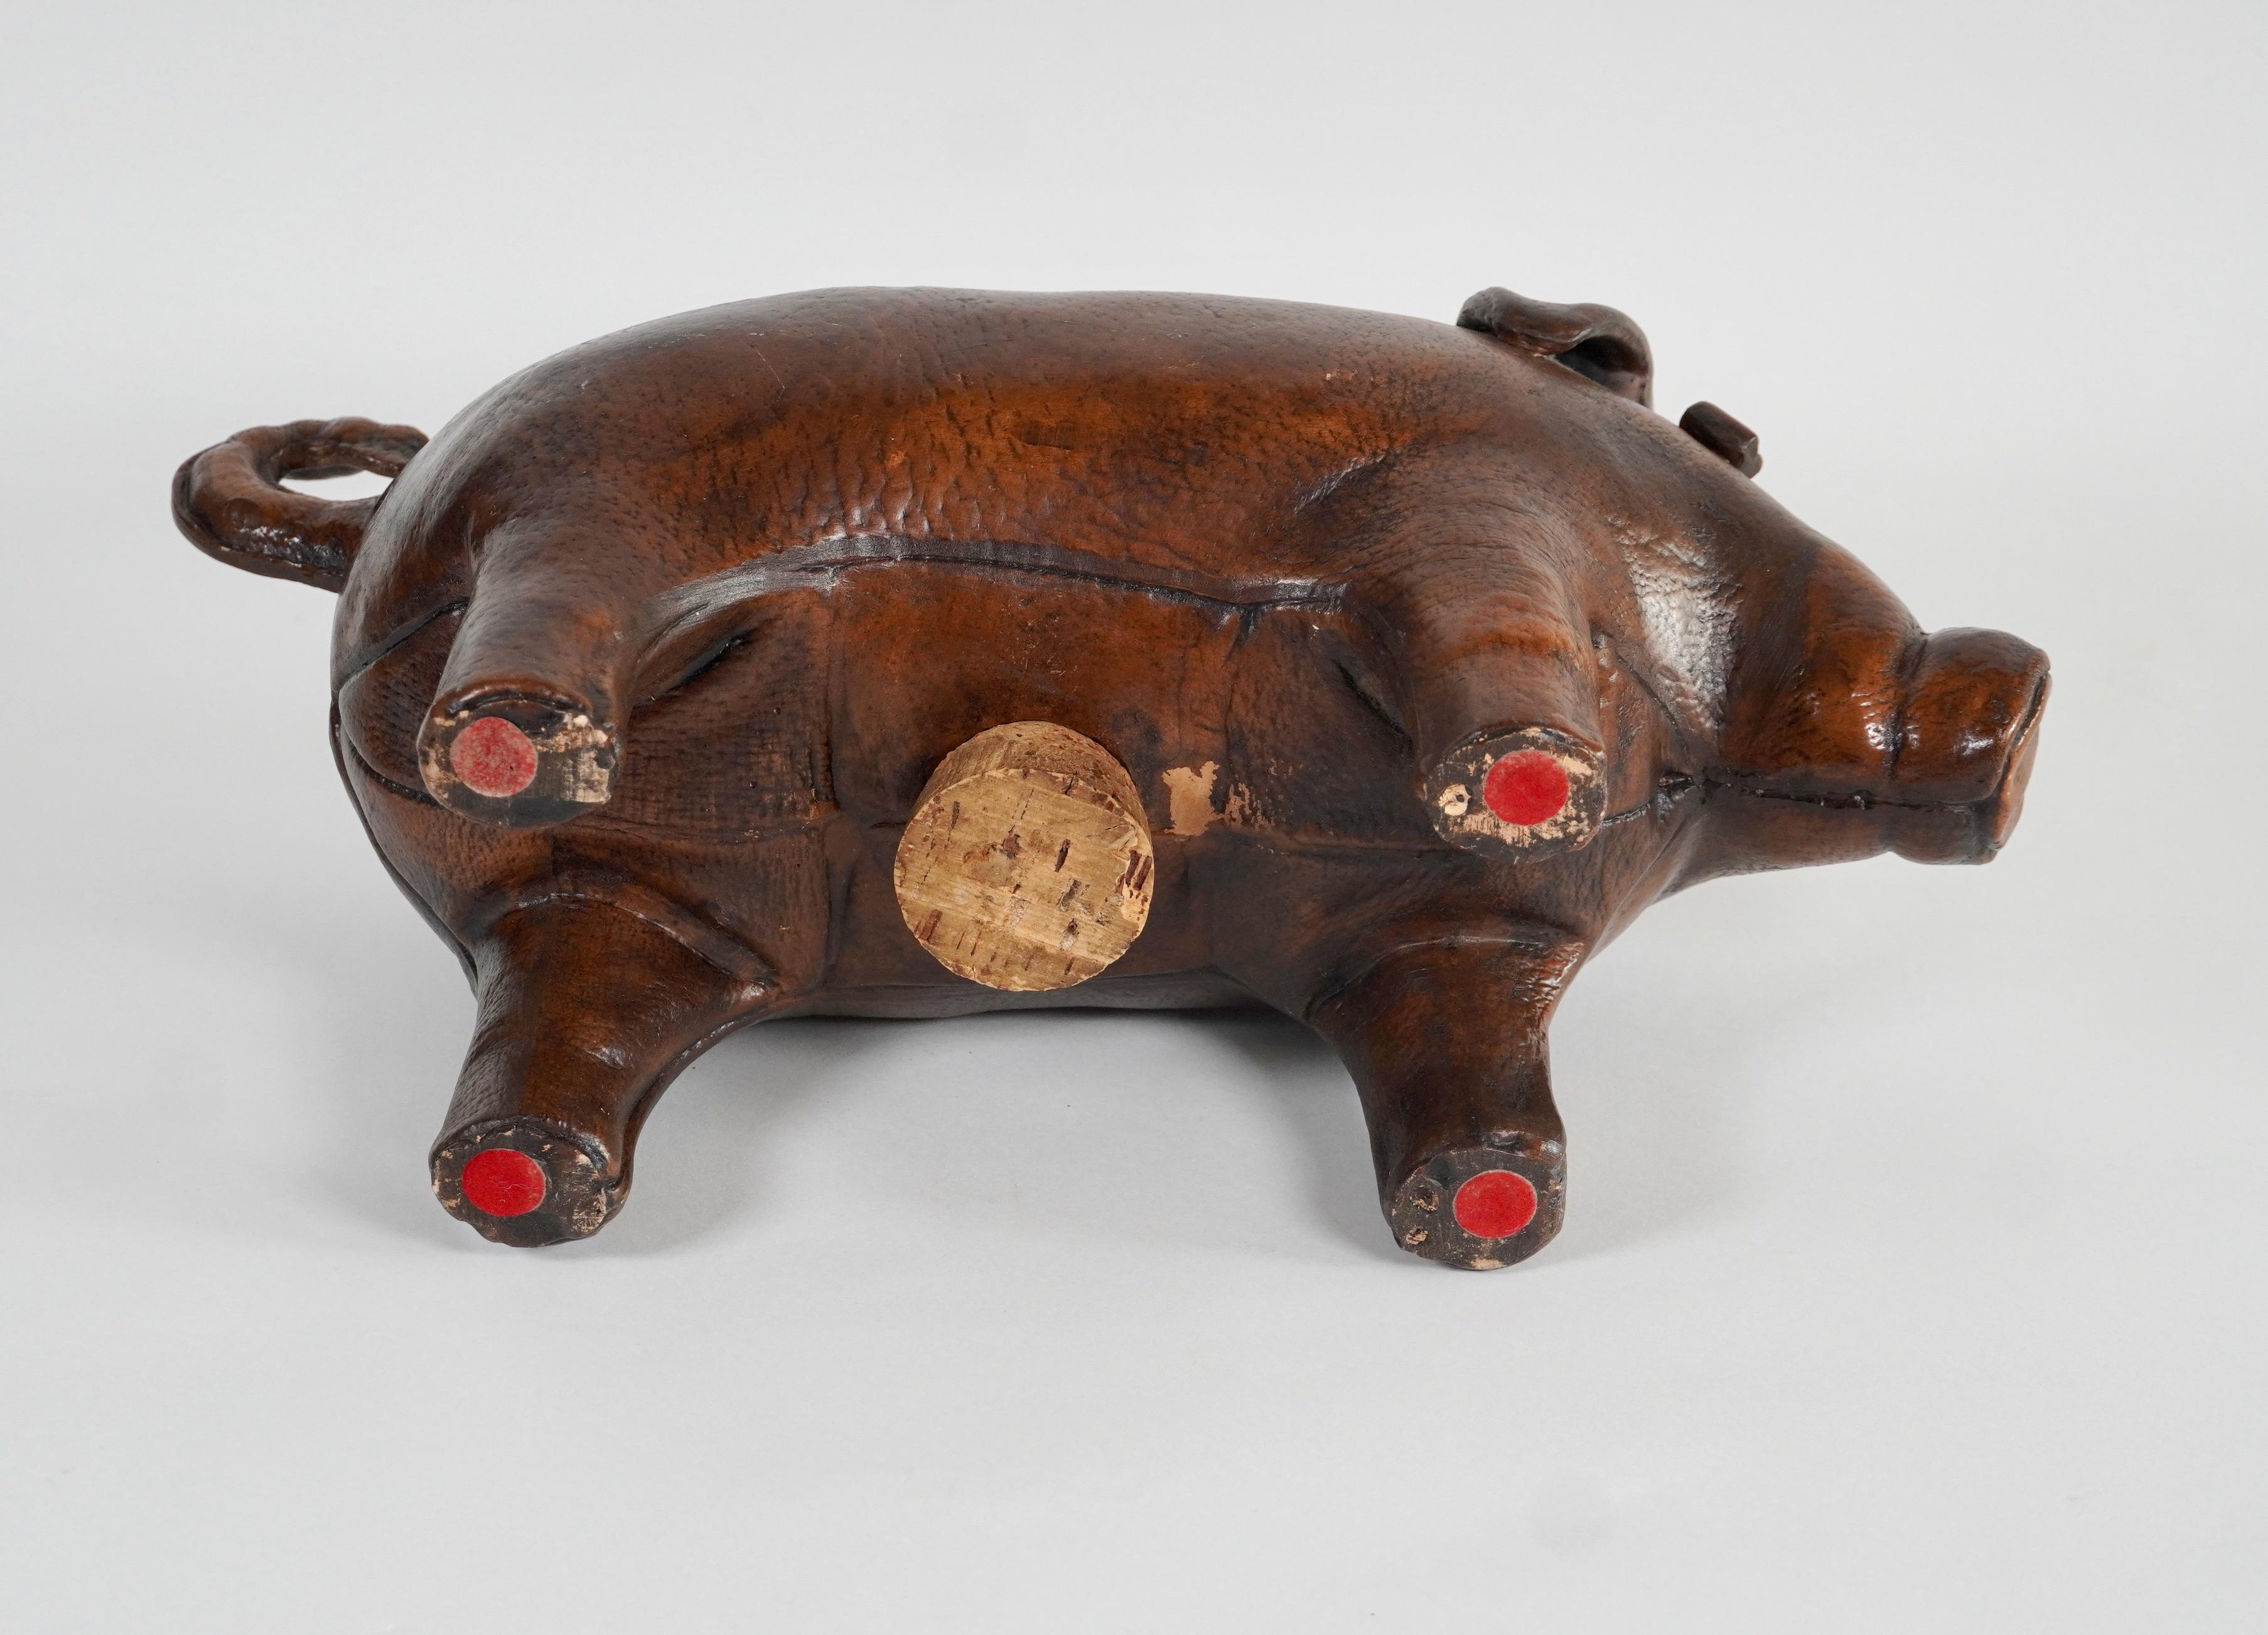 Realistic Ceramic Piggy Bank in the Style of an Omersa Leather Pig 2